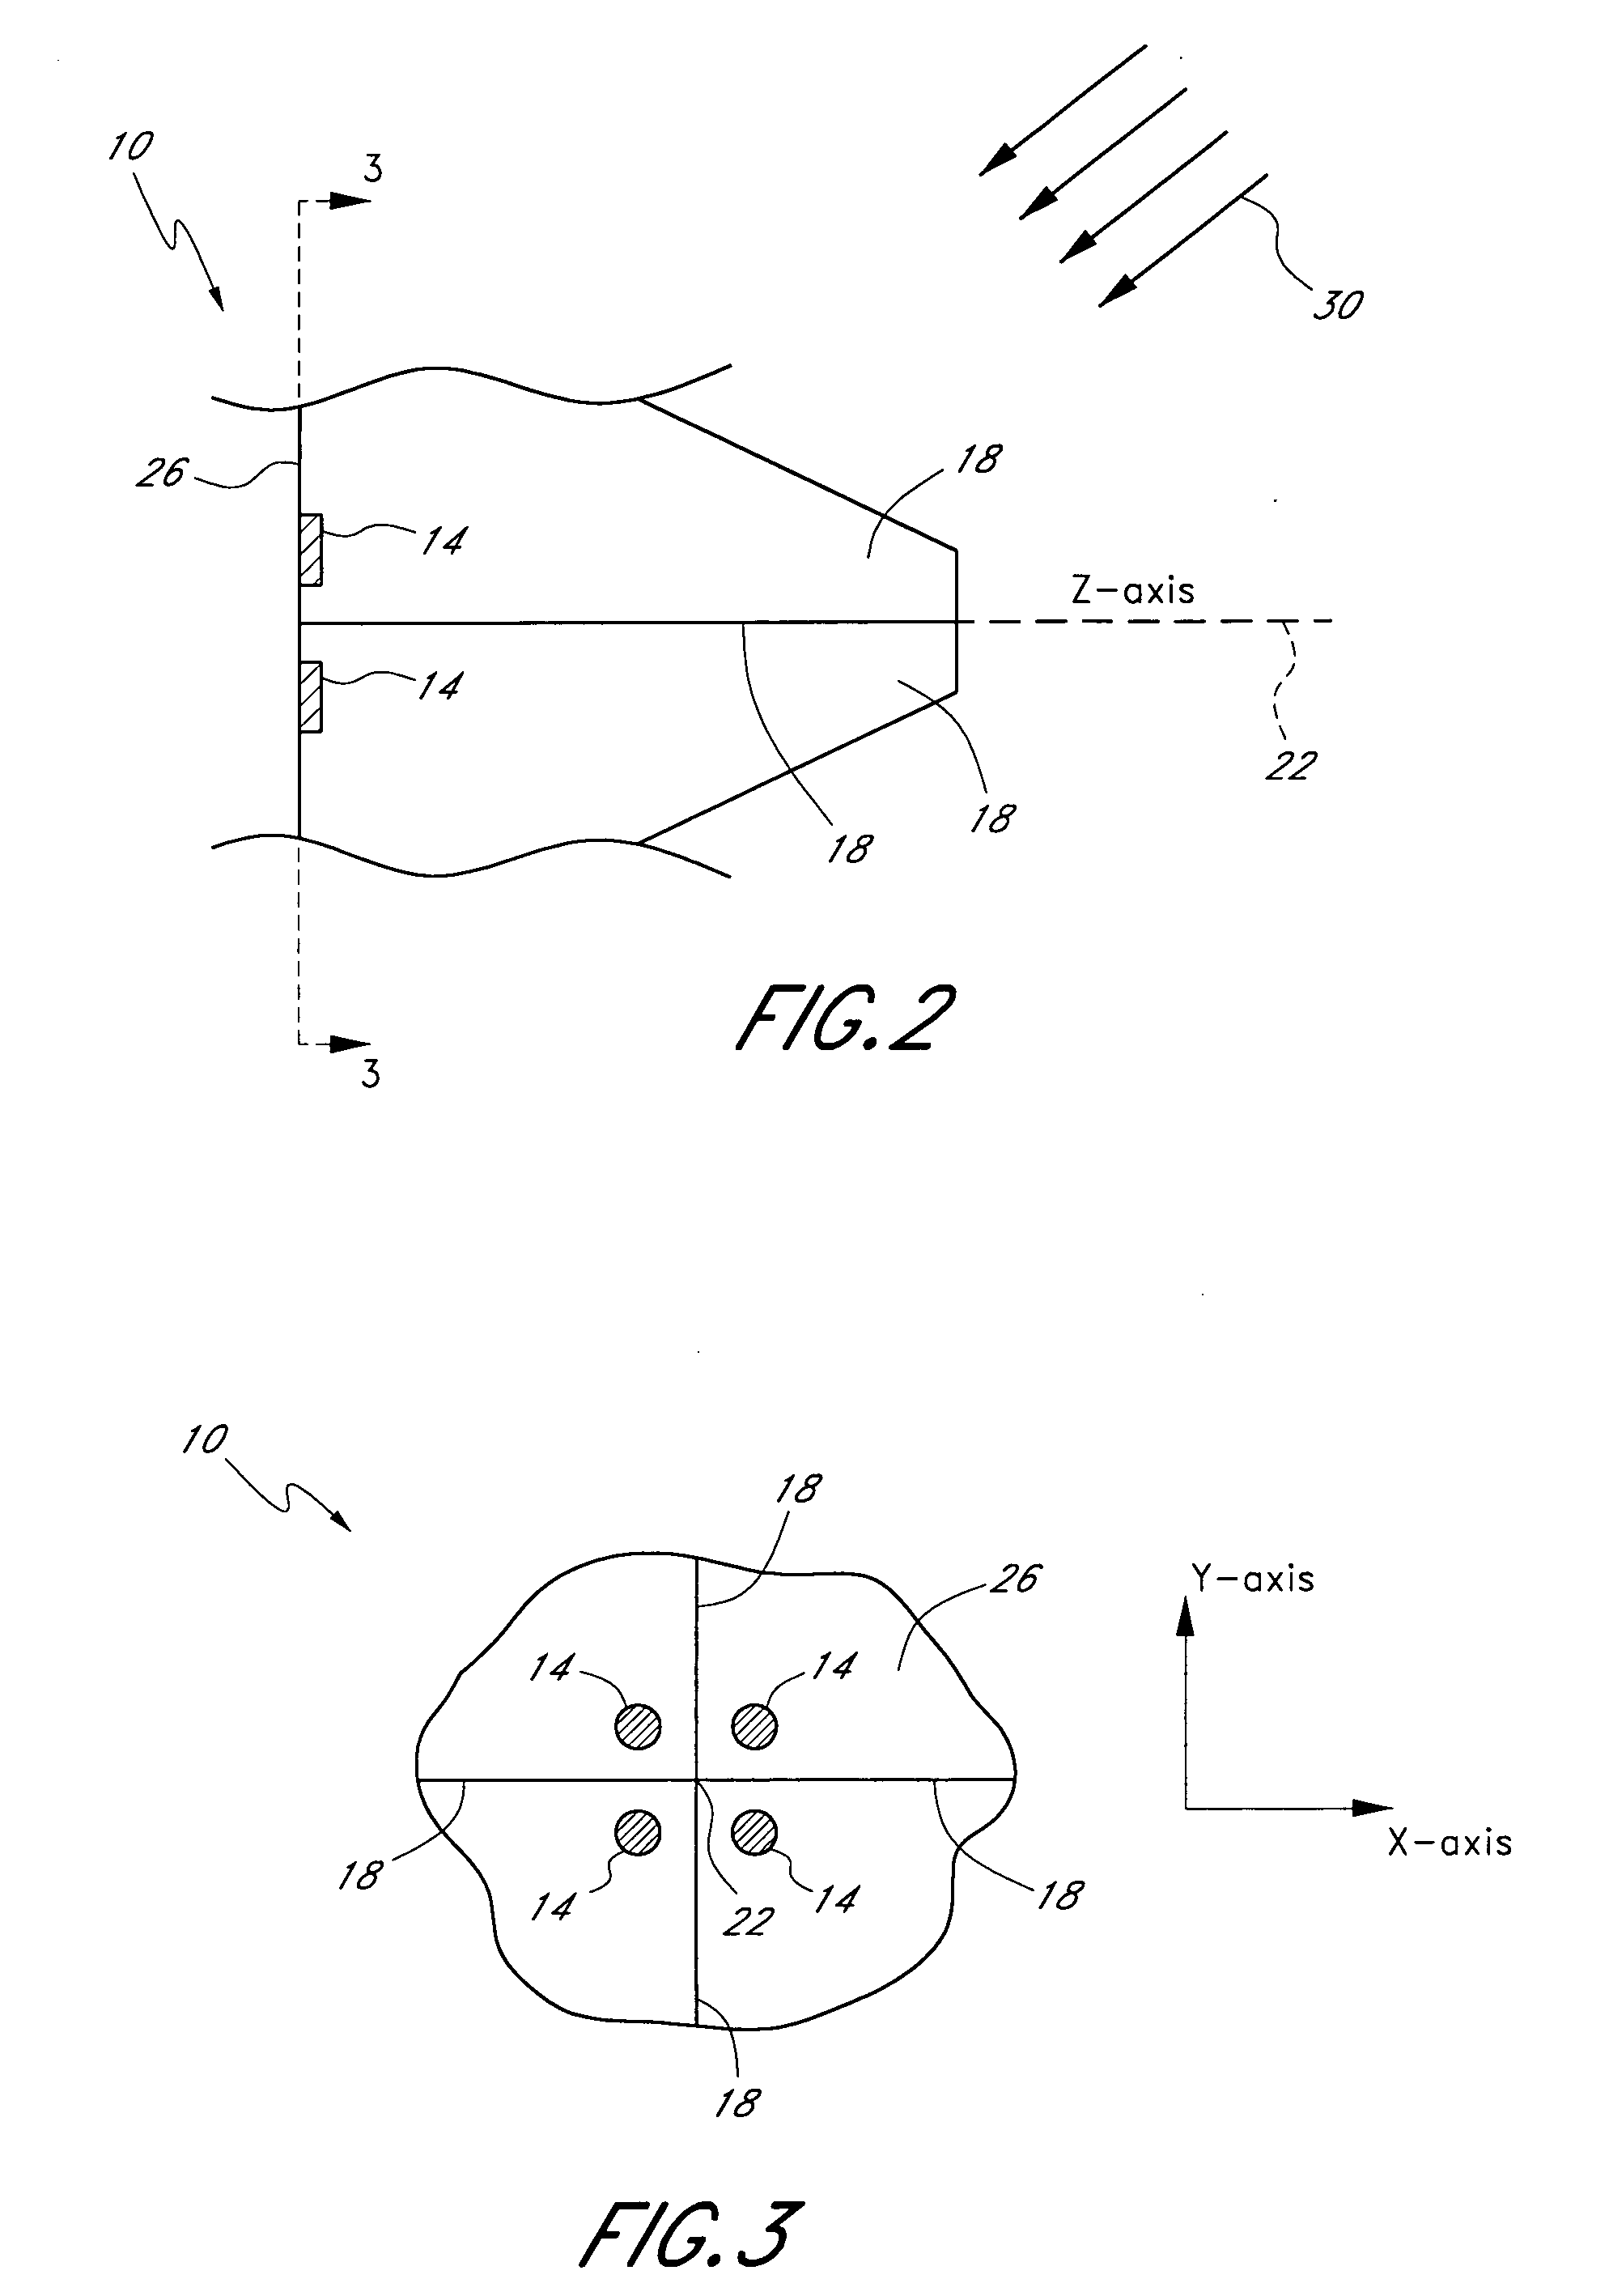 Apparatus and methods to locate and track the sun